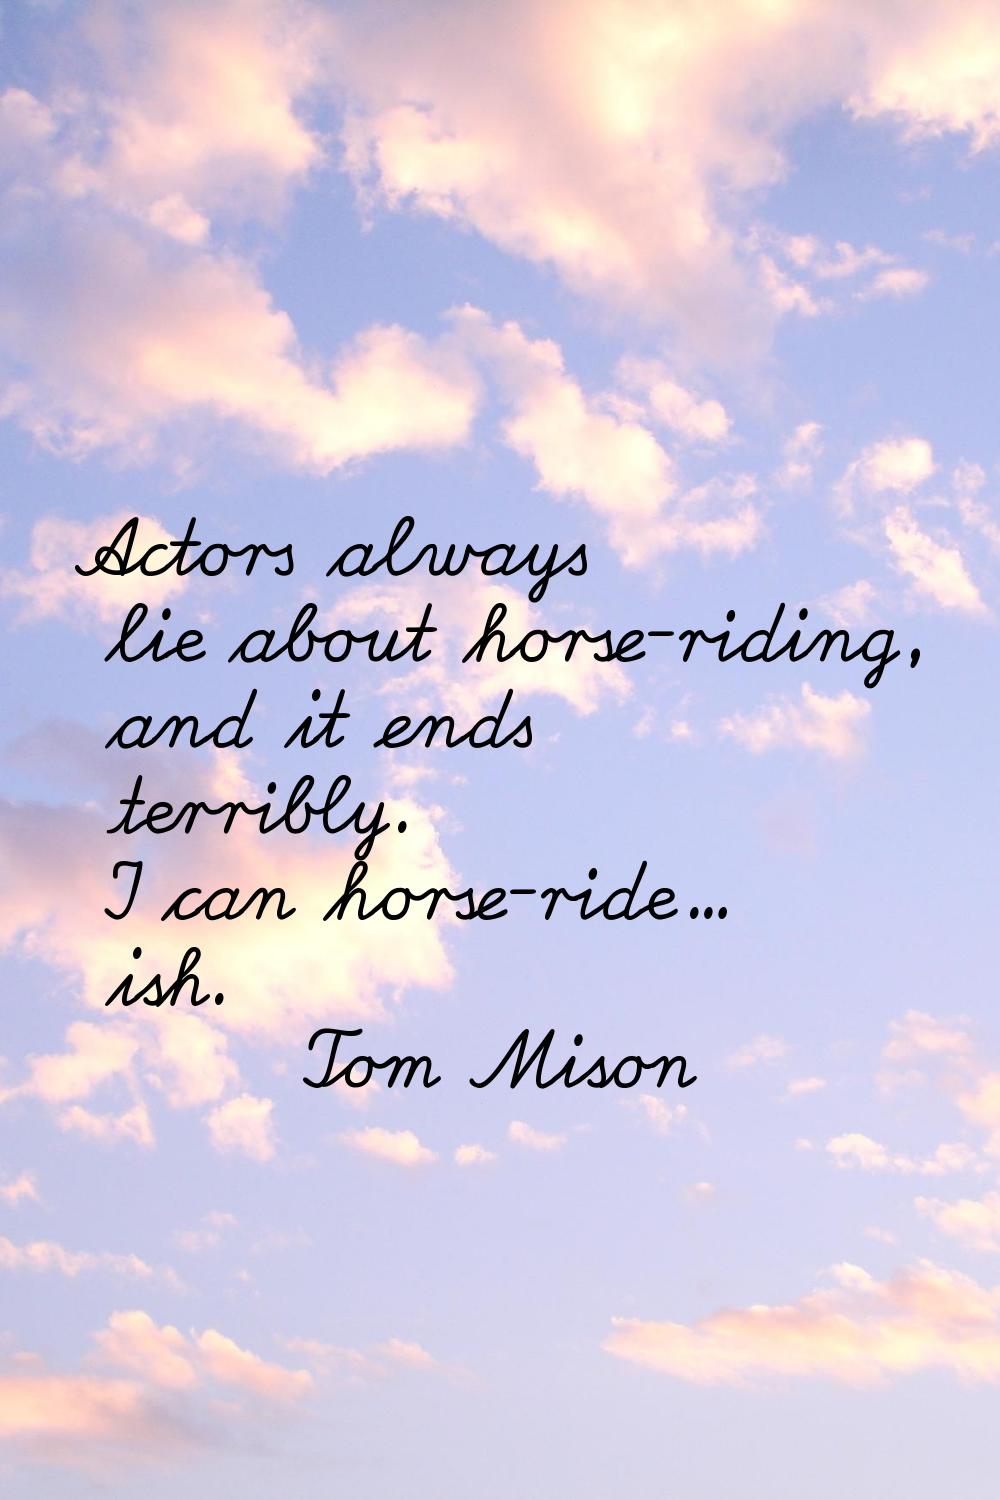 Actors always lie about horse-riding, and it ends terribly. I can horse-ride... ish.